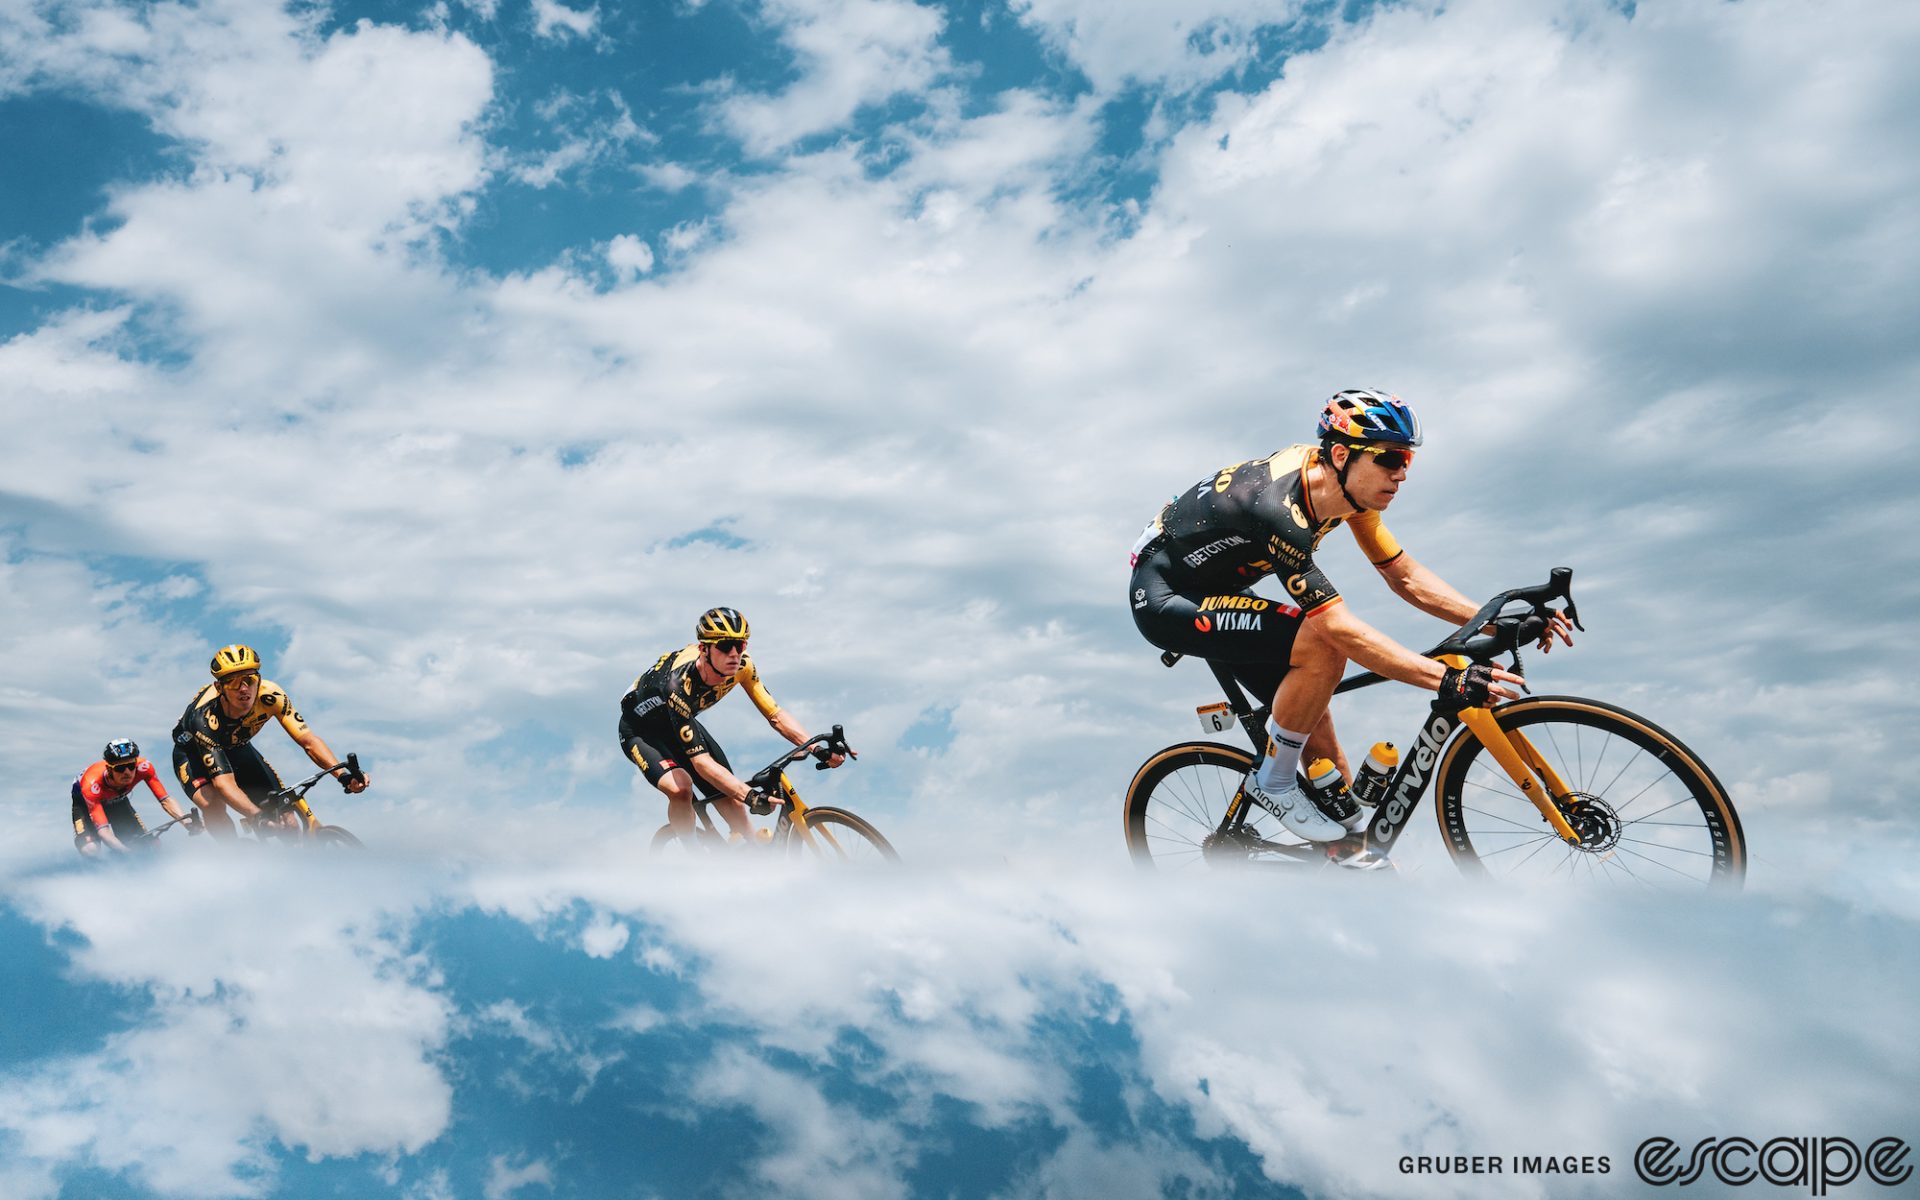 Wout van Aert leads Jumbo riders on a descent at the 2023 Tour de France. He's arcing around a corner under a blue sky with white-and-grey clouds, reflected in the bottom third of the image in a compositional creation.